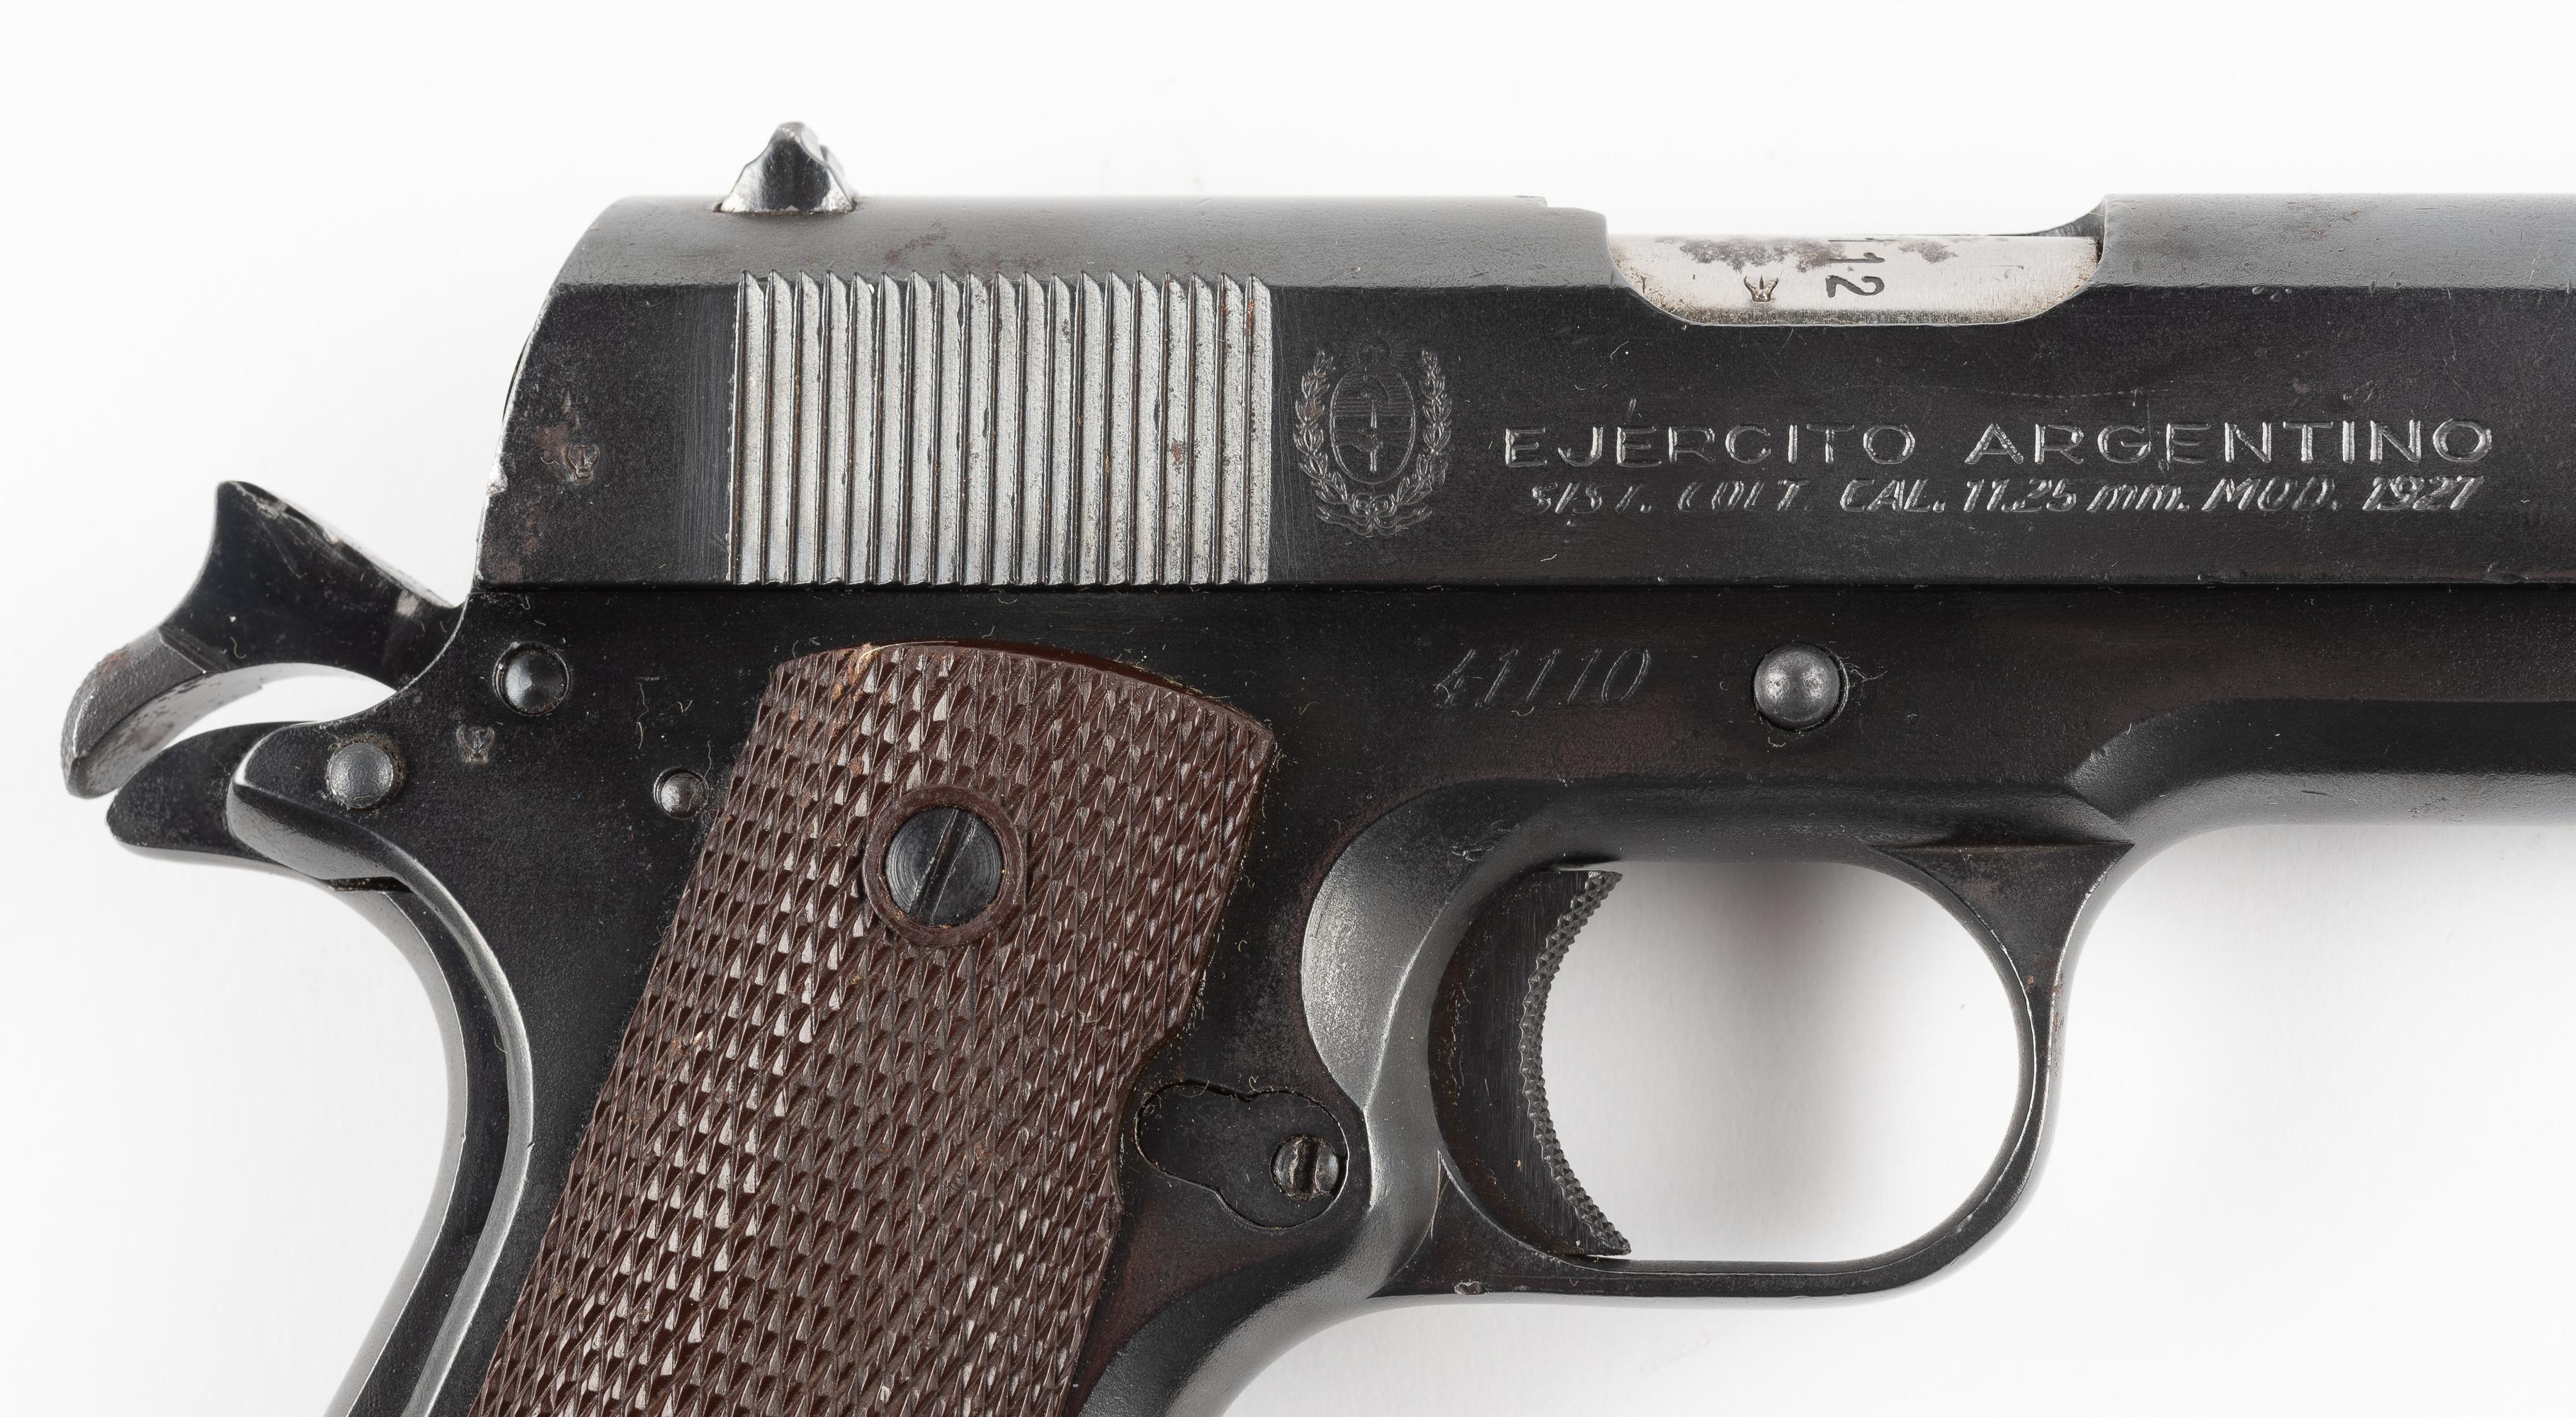 Ejercito Argentino Systems Colt 1927 Pistol, .45